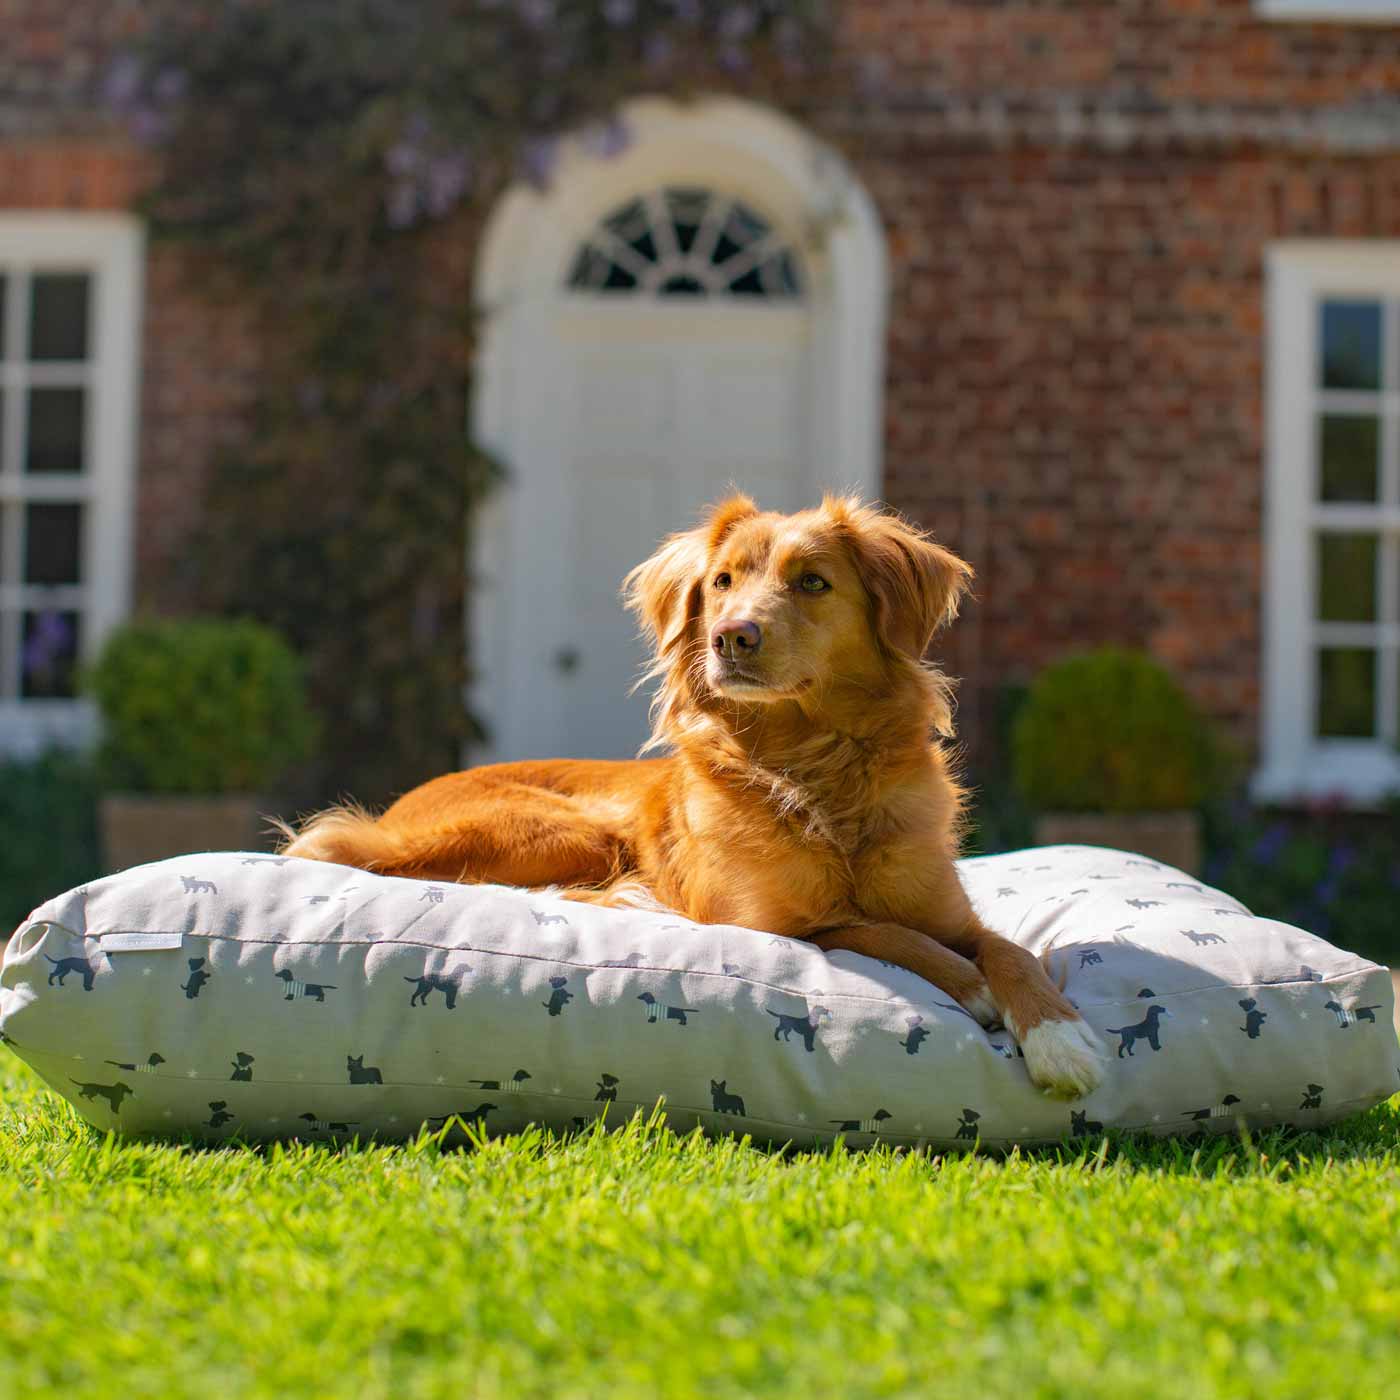 Luxury Sleepeeze Dog Cushion in Cosmopolitan Dog, The Perfect Pet Bed Time Accessory! Available Now at Lords & Labradors